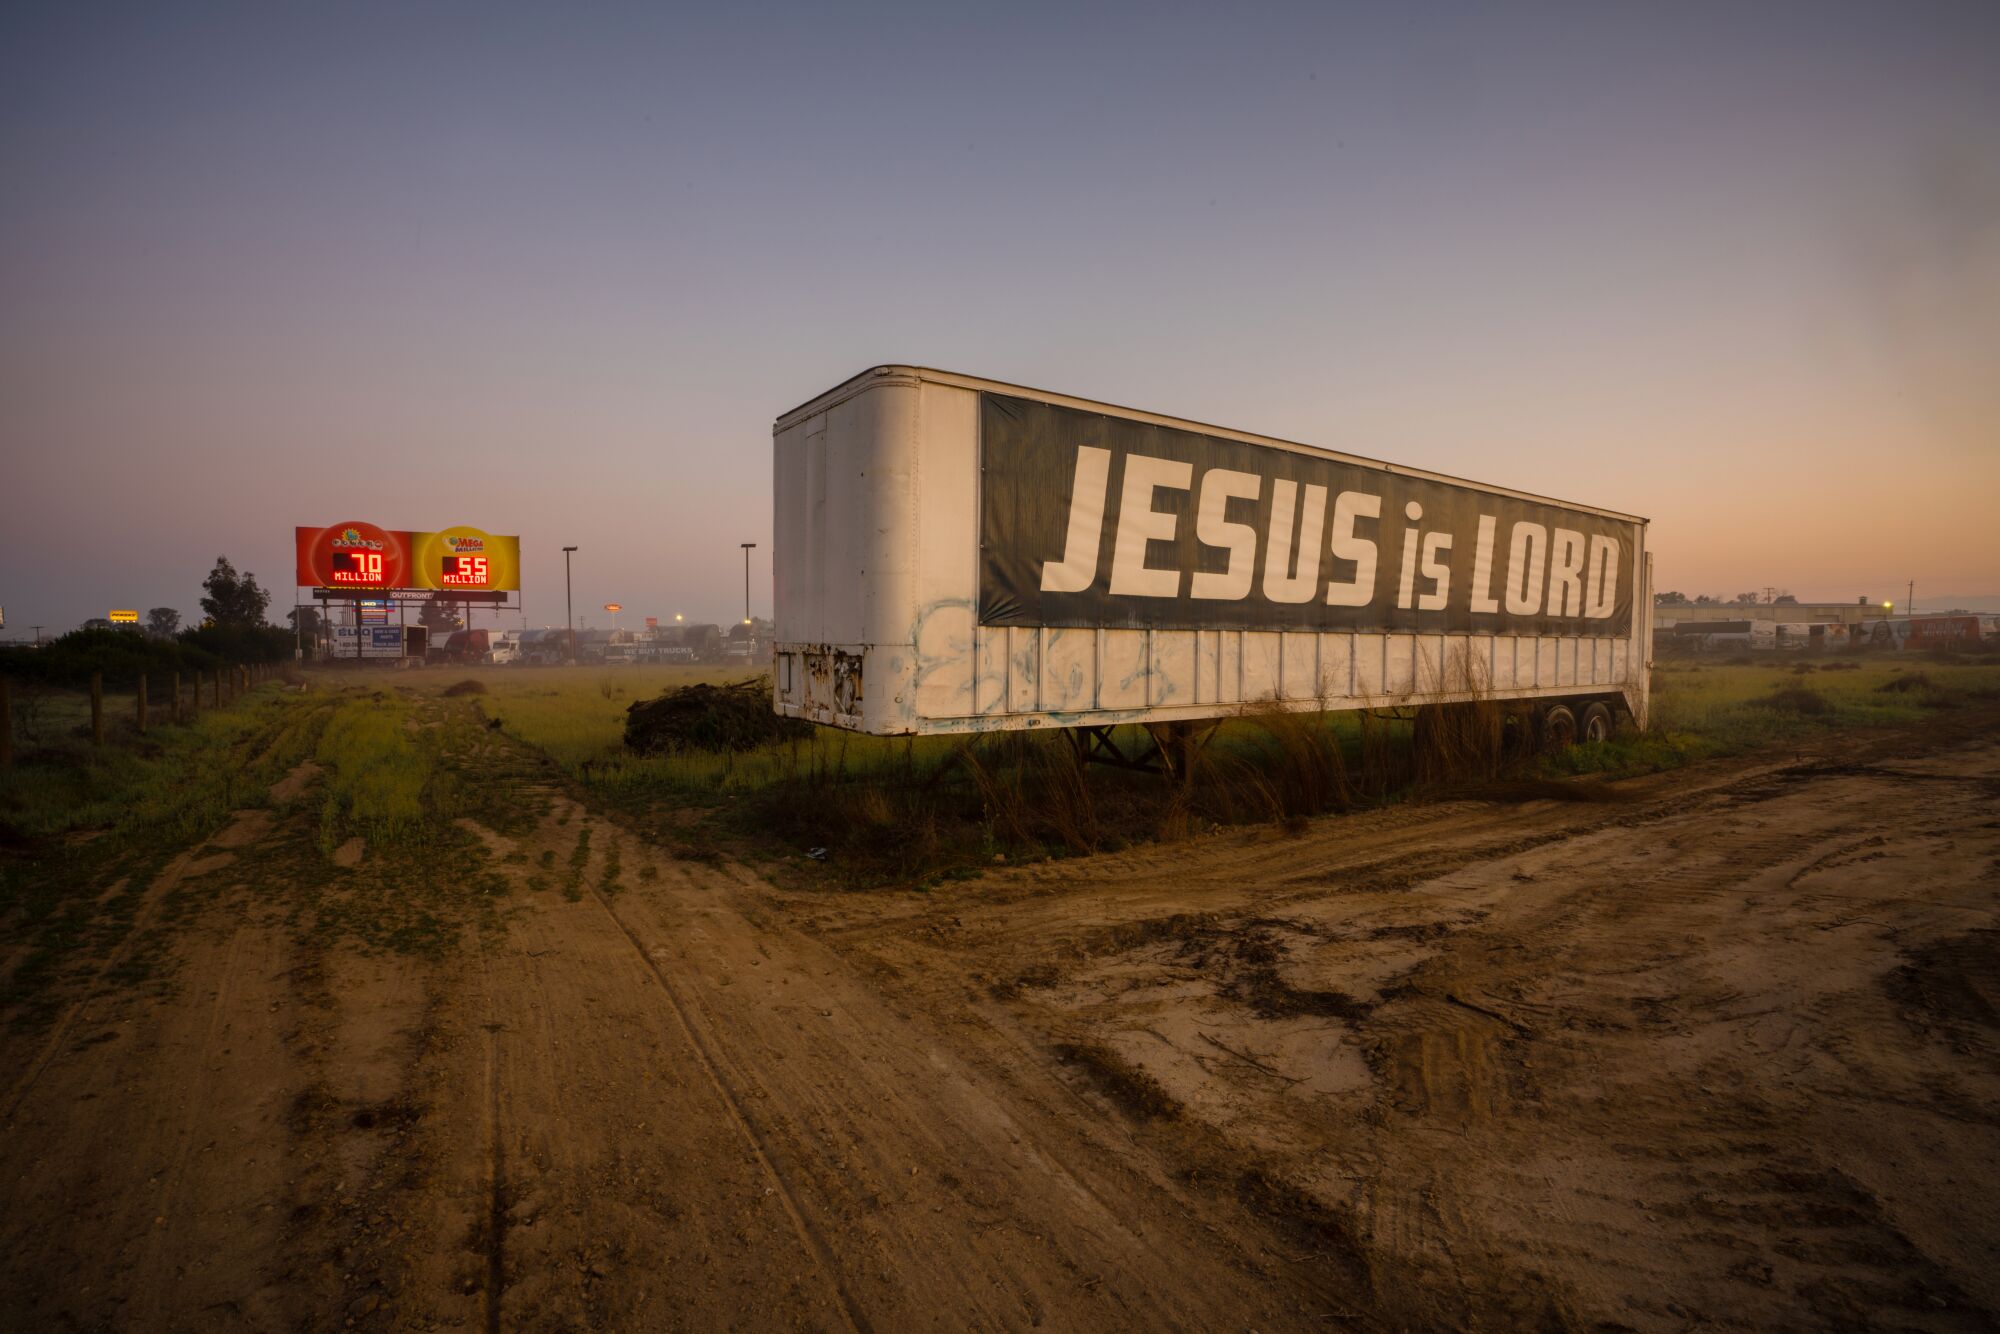 A trailer with a religious message just south of Fresno off of Highway 99.